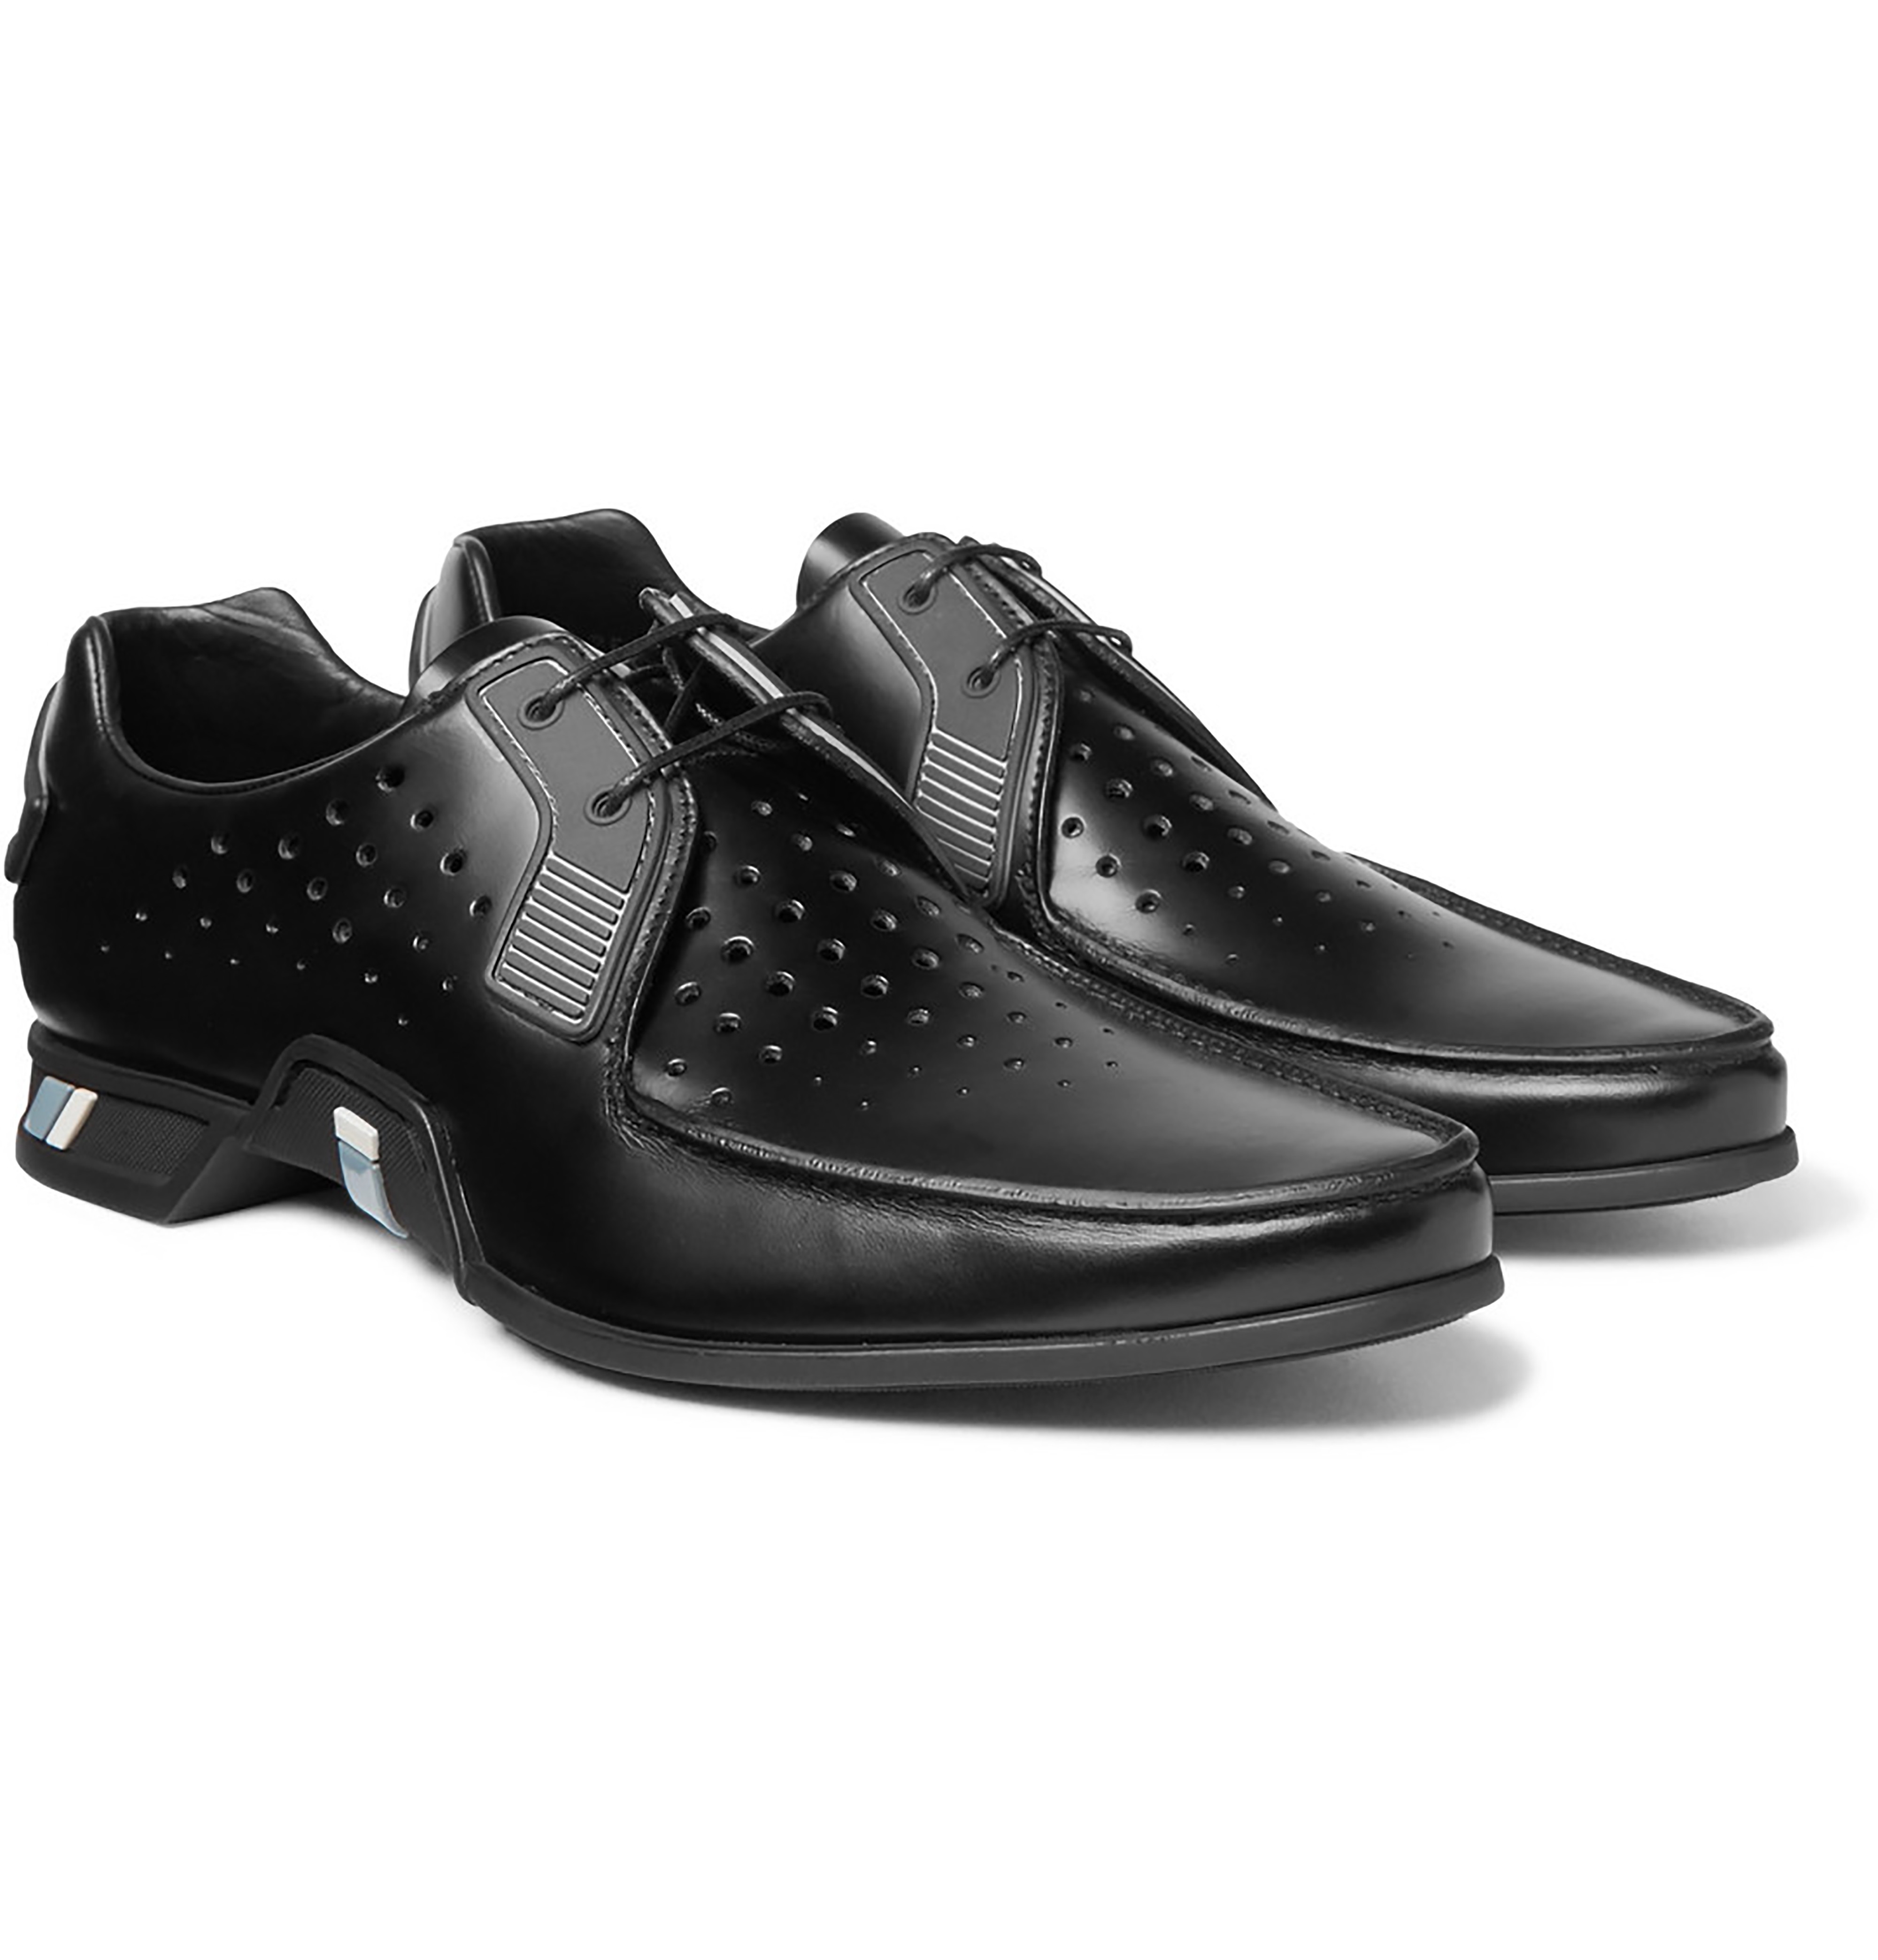 Parda These ultramodern spazzolato derbys are equipped with graphic perforations - an example of Prada's reference to 90s-comics in the men's Fall 2018 collection. The shoes' sharp silhouette boasts the house's novel design language.